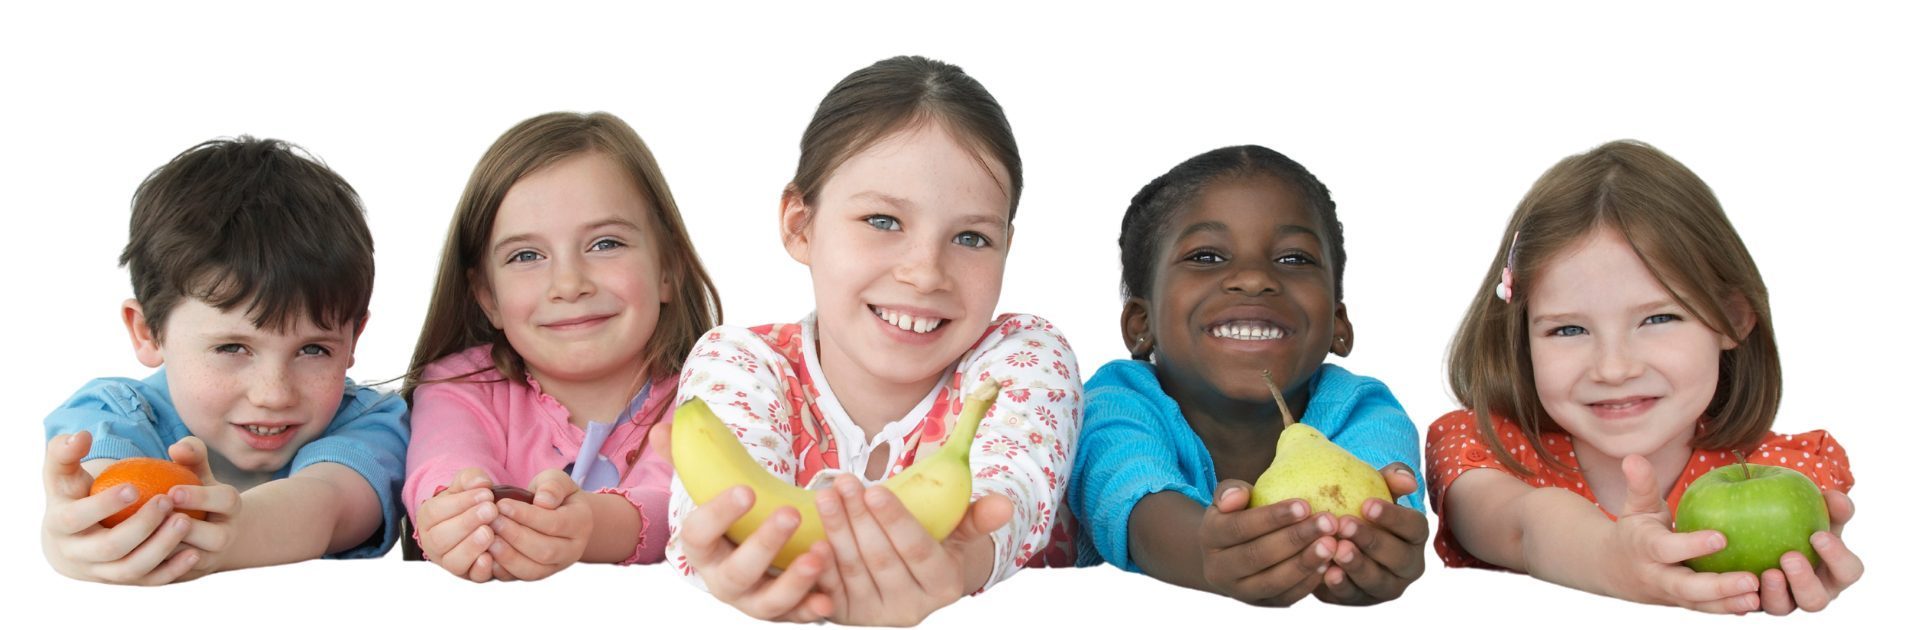 online courses website title with kids holding fruit in their hands.